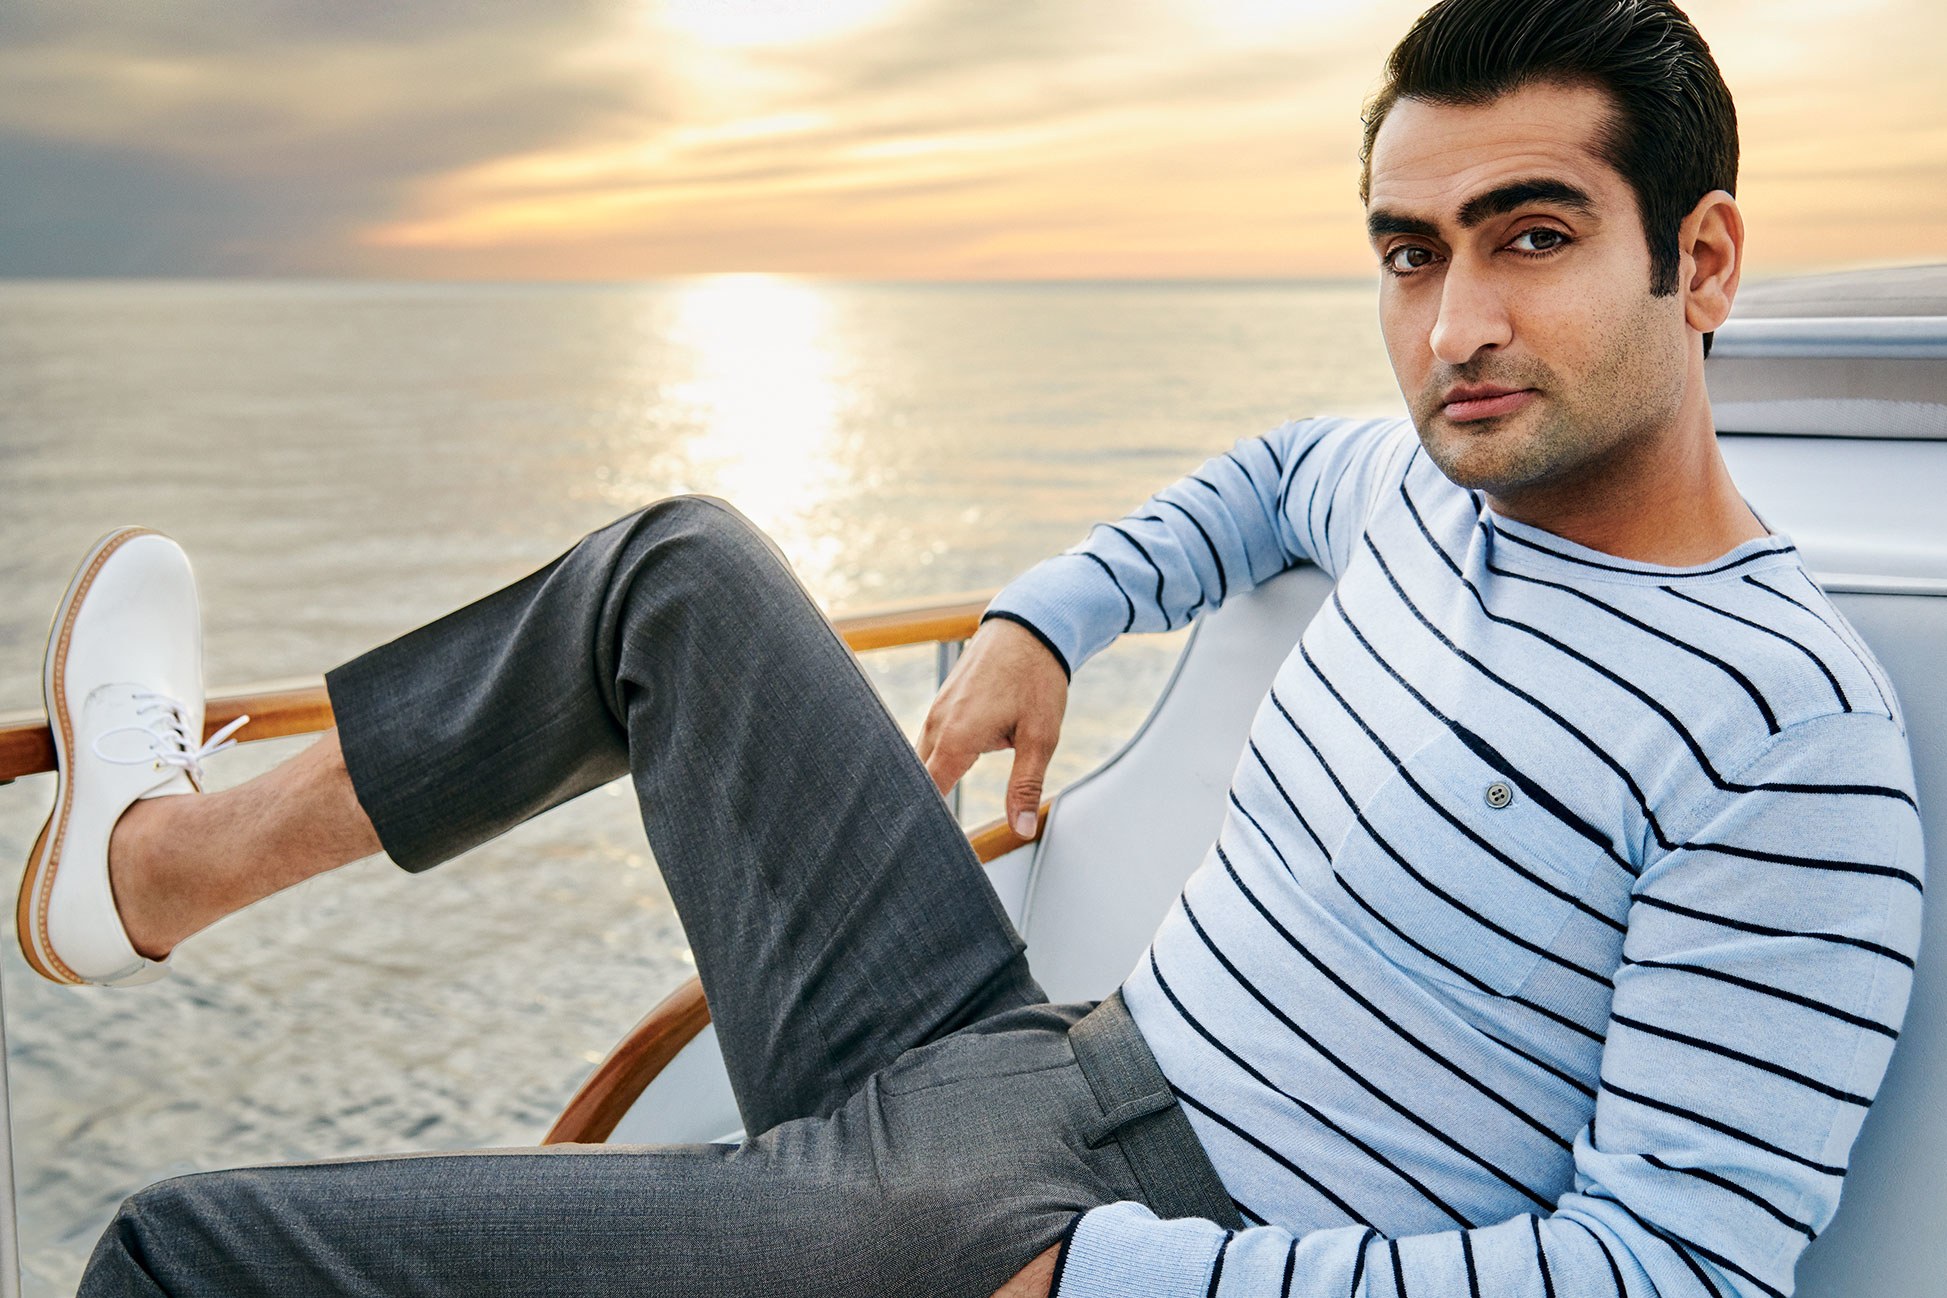 kumail nanjiani to star in adaptation of any person living or dead